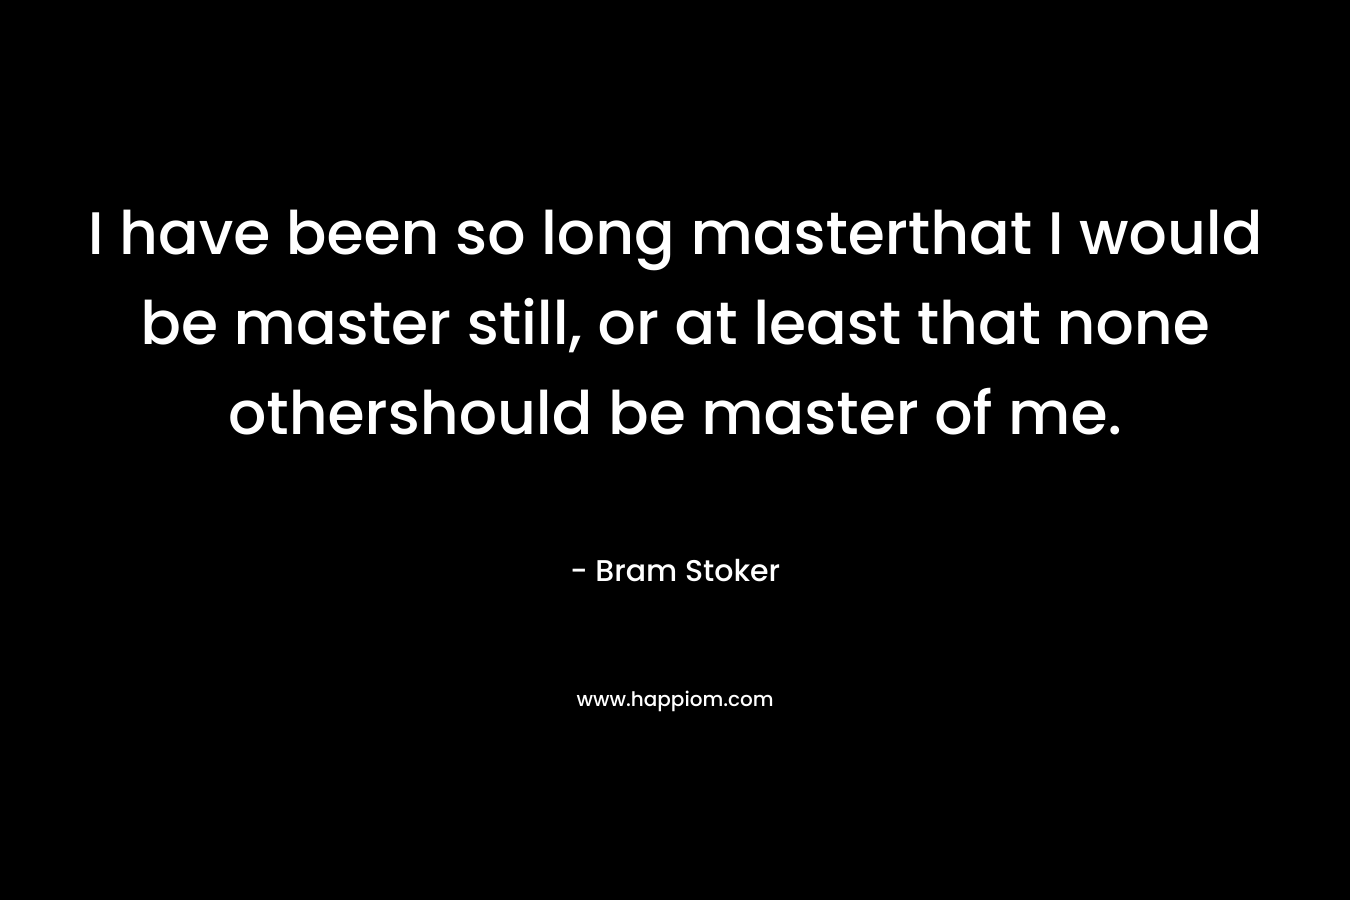 I have been so long masterthat I would be master still, or at least that none othershould be master of me. – Bram Stoker